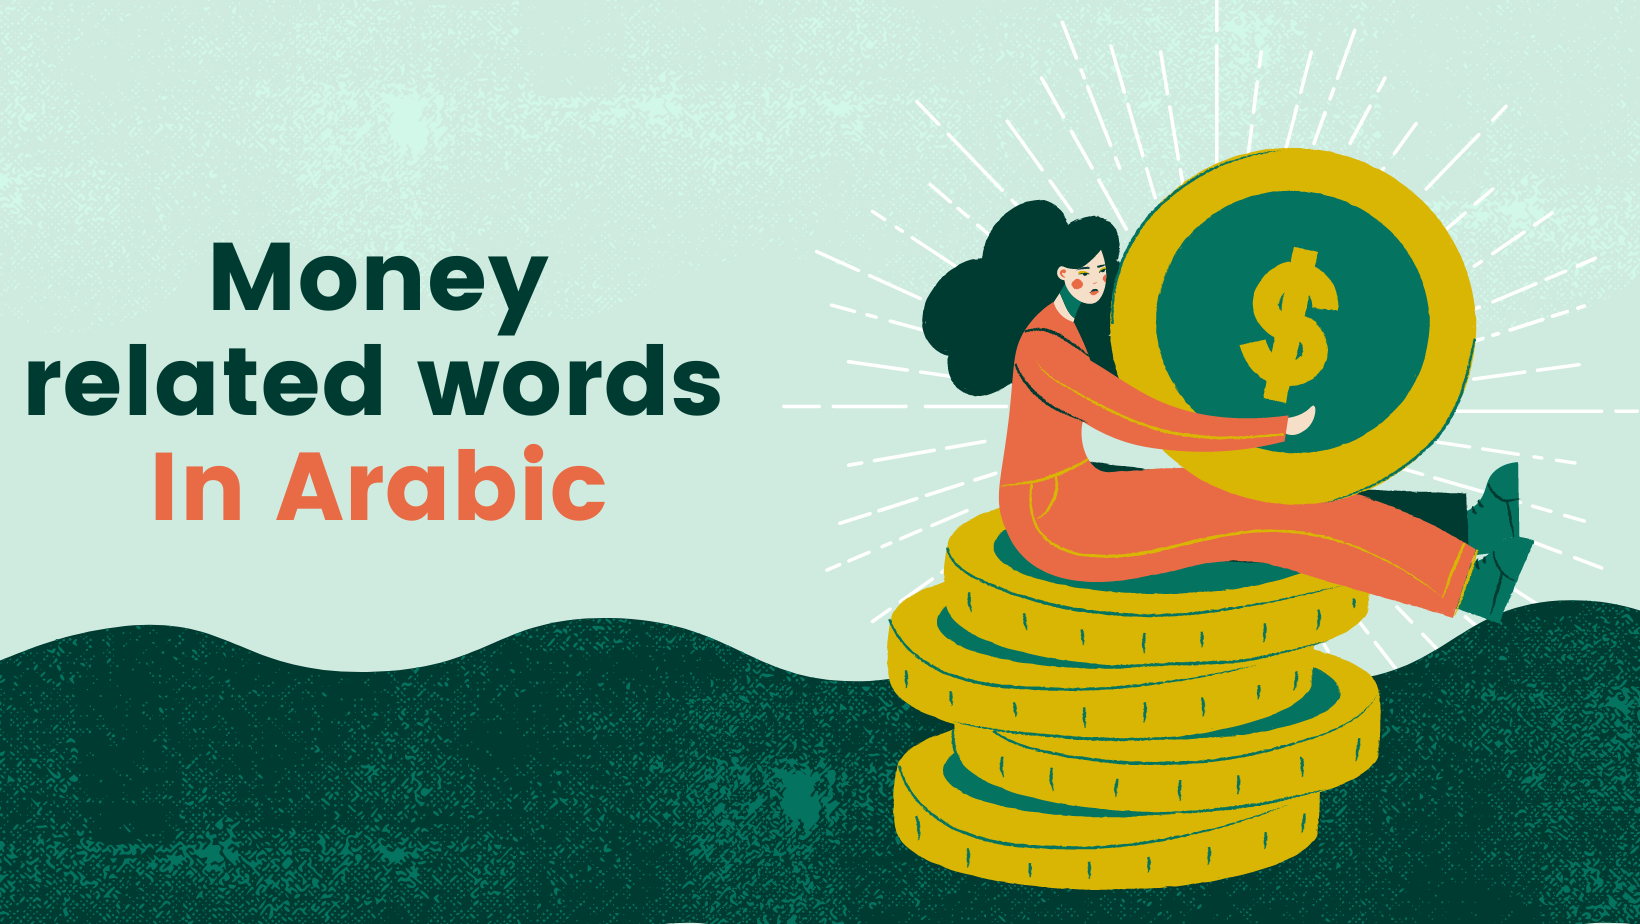 Money related words in Arabic